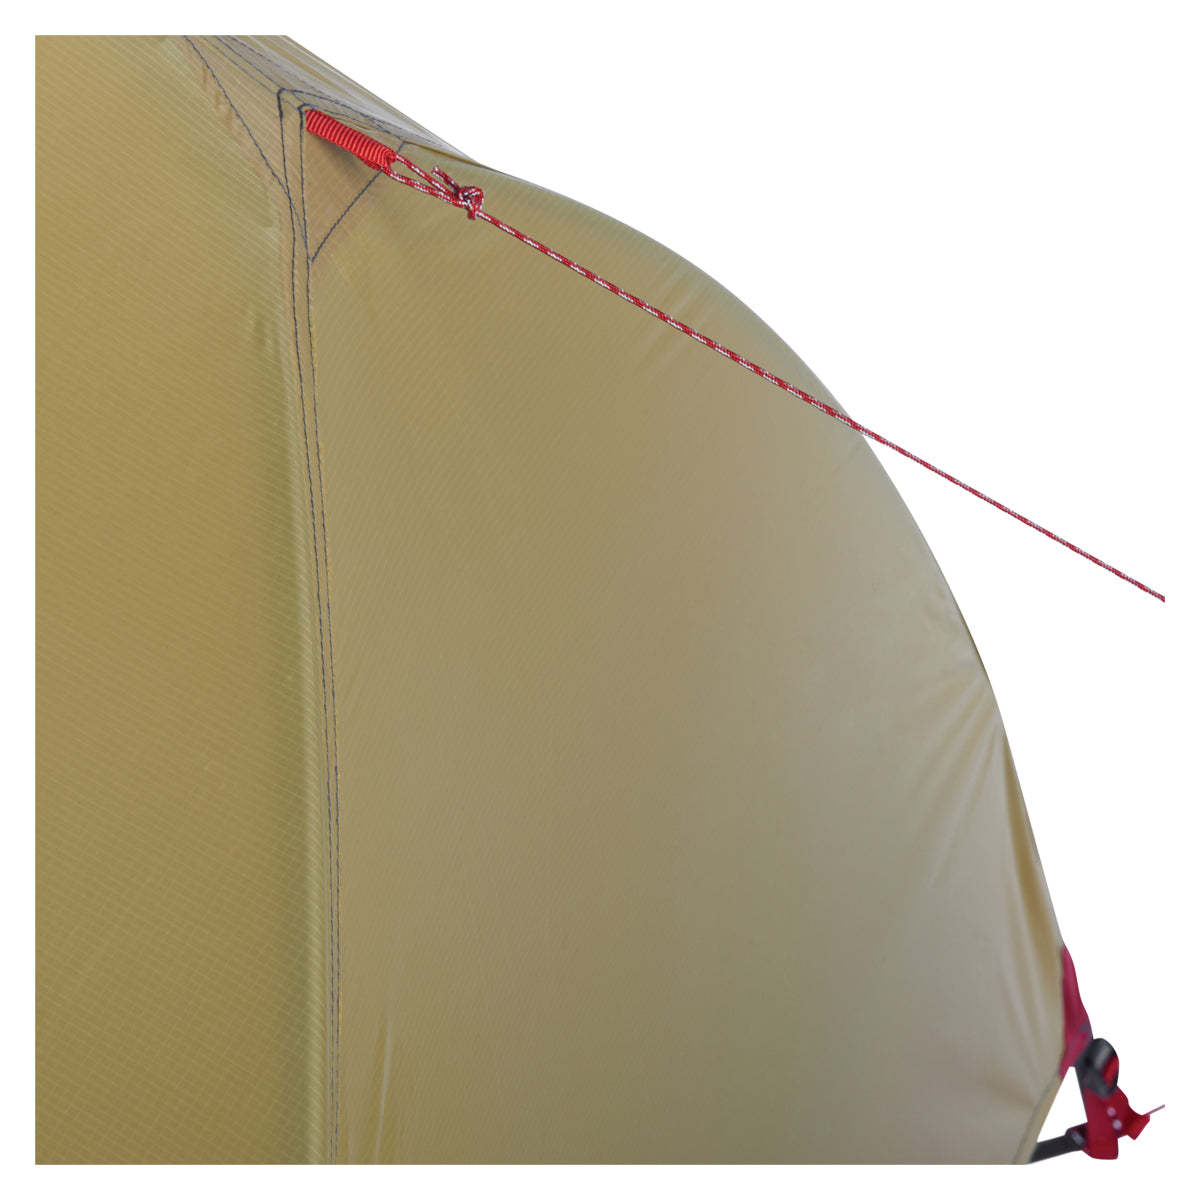 MSR Hubba Hubba 3 Person Tent in  by GOHUNT | MSR - GOHUNT Shop